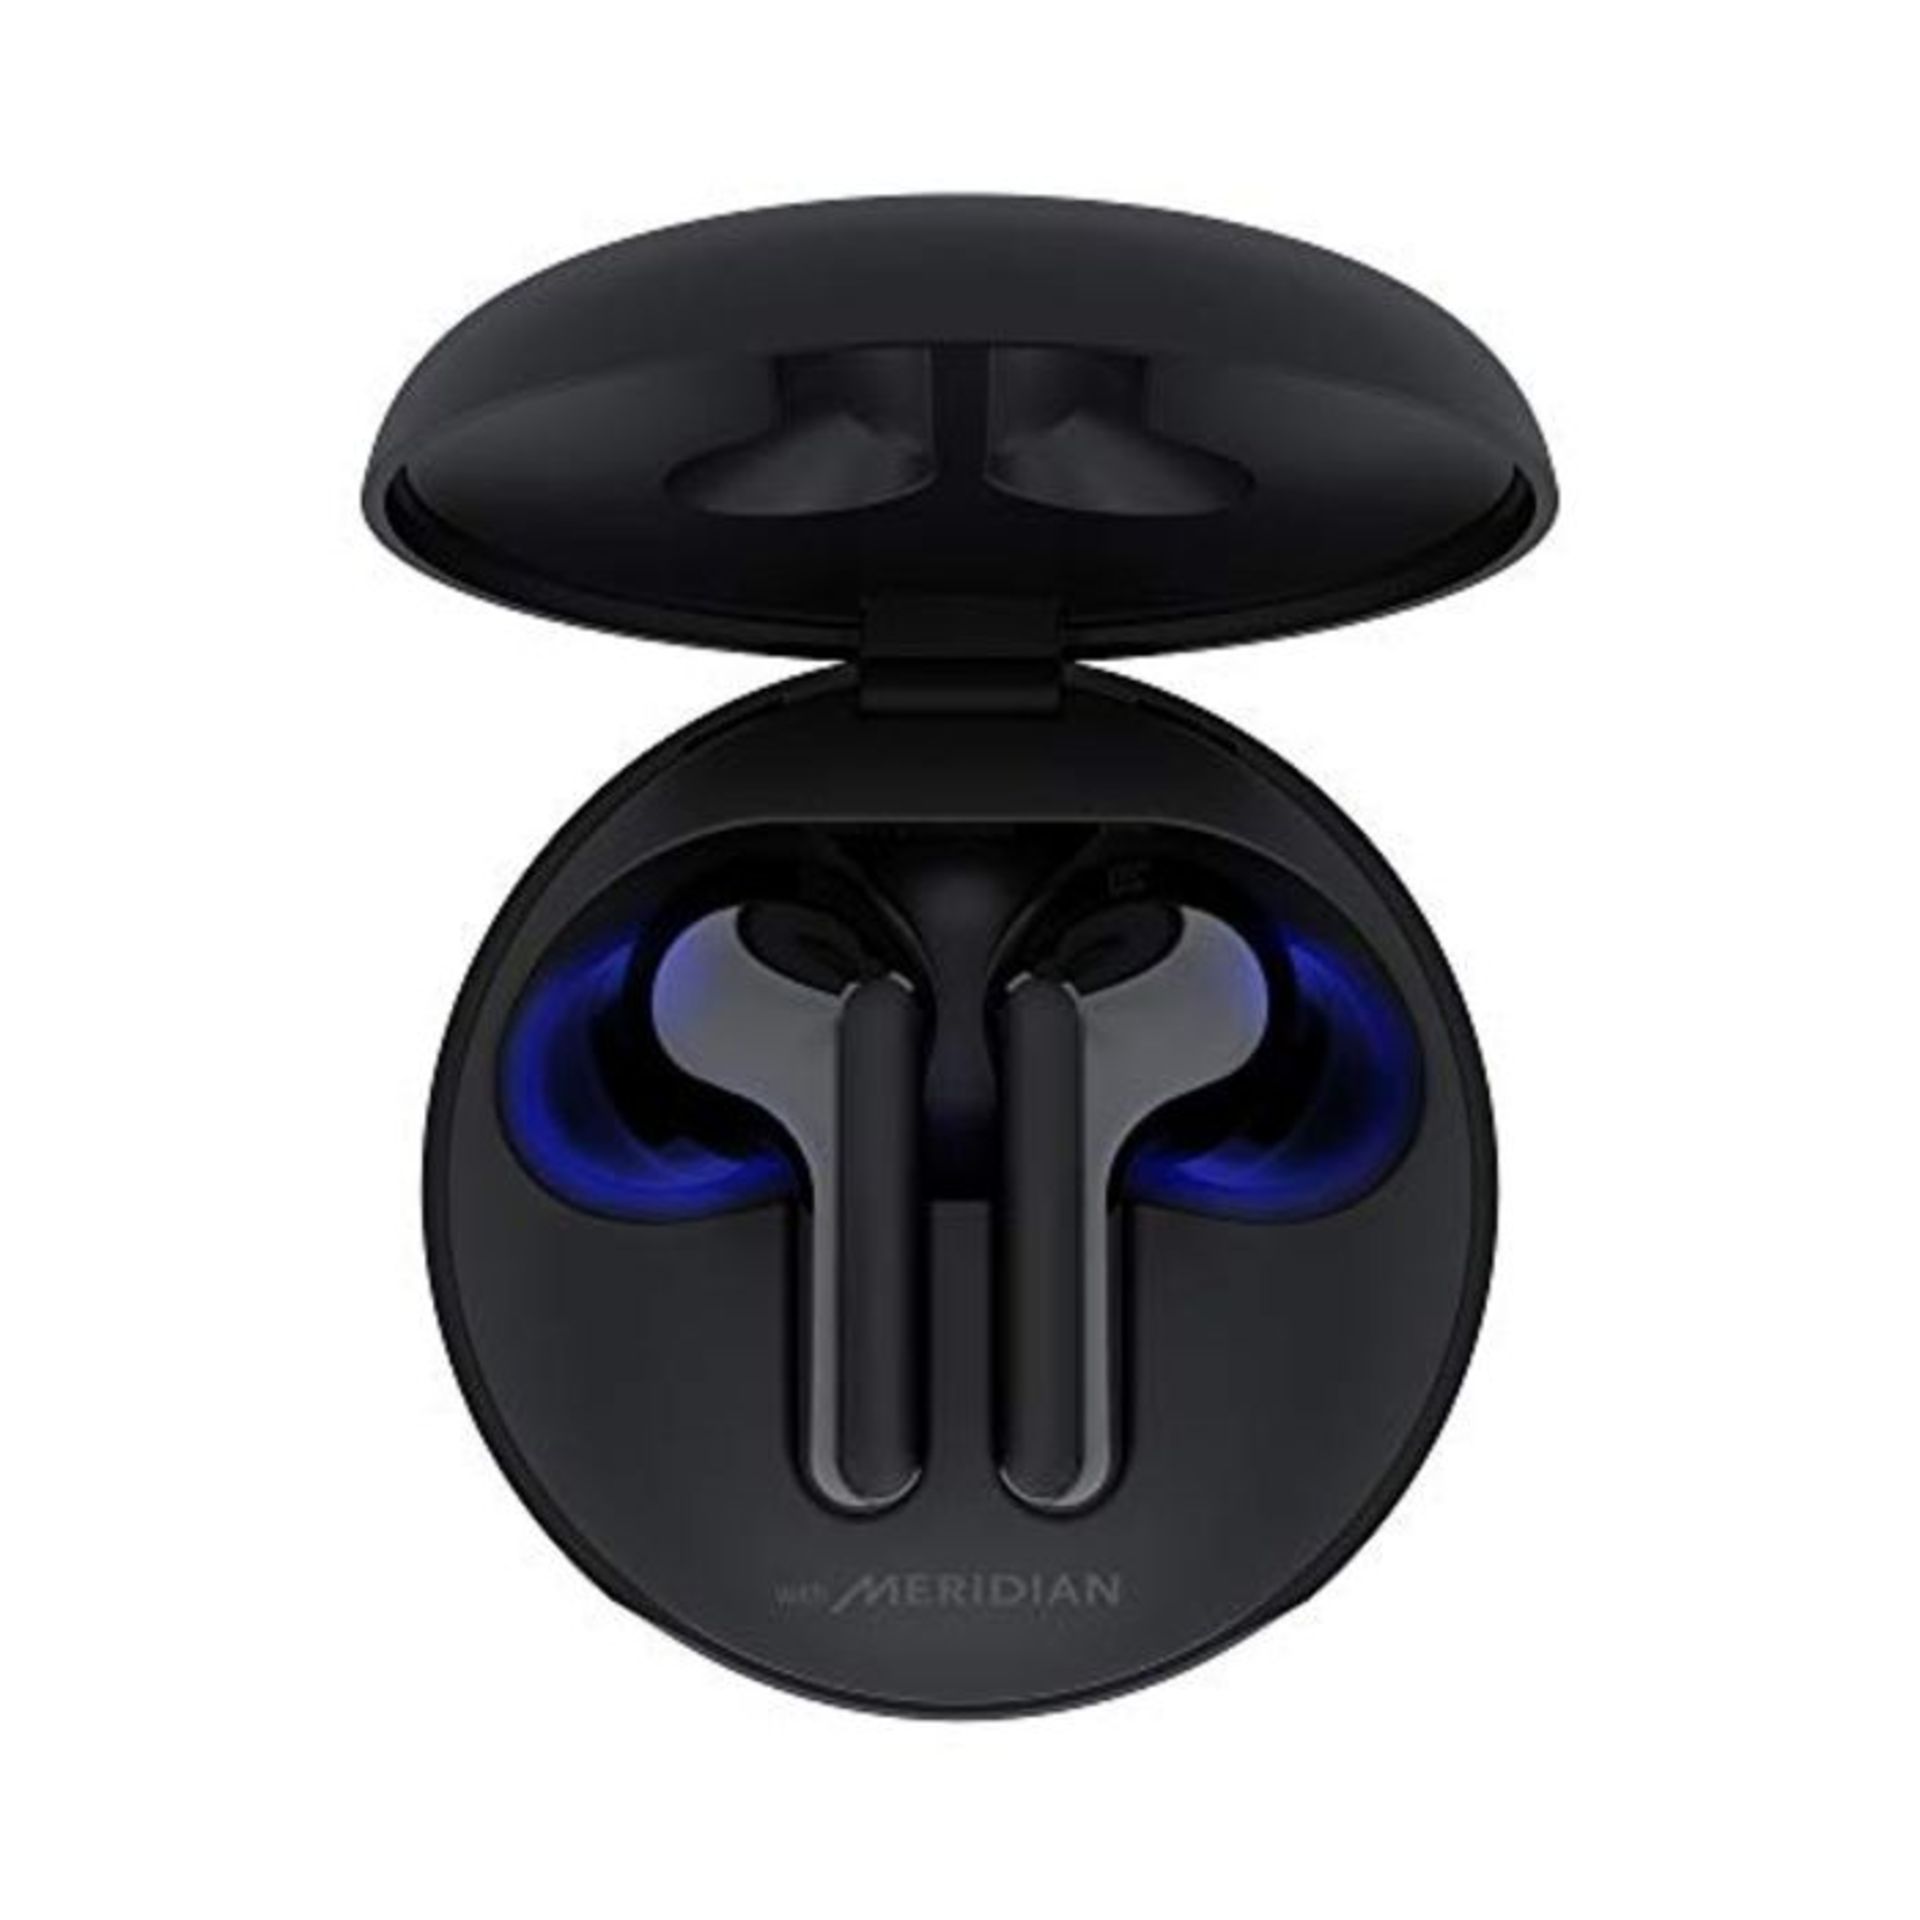 RRP £97.00 LG TONE Free FN6 True Wireless Bluetooth Earbuds with UVNano Wireless Charging Case, W